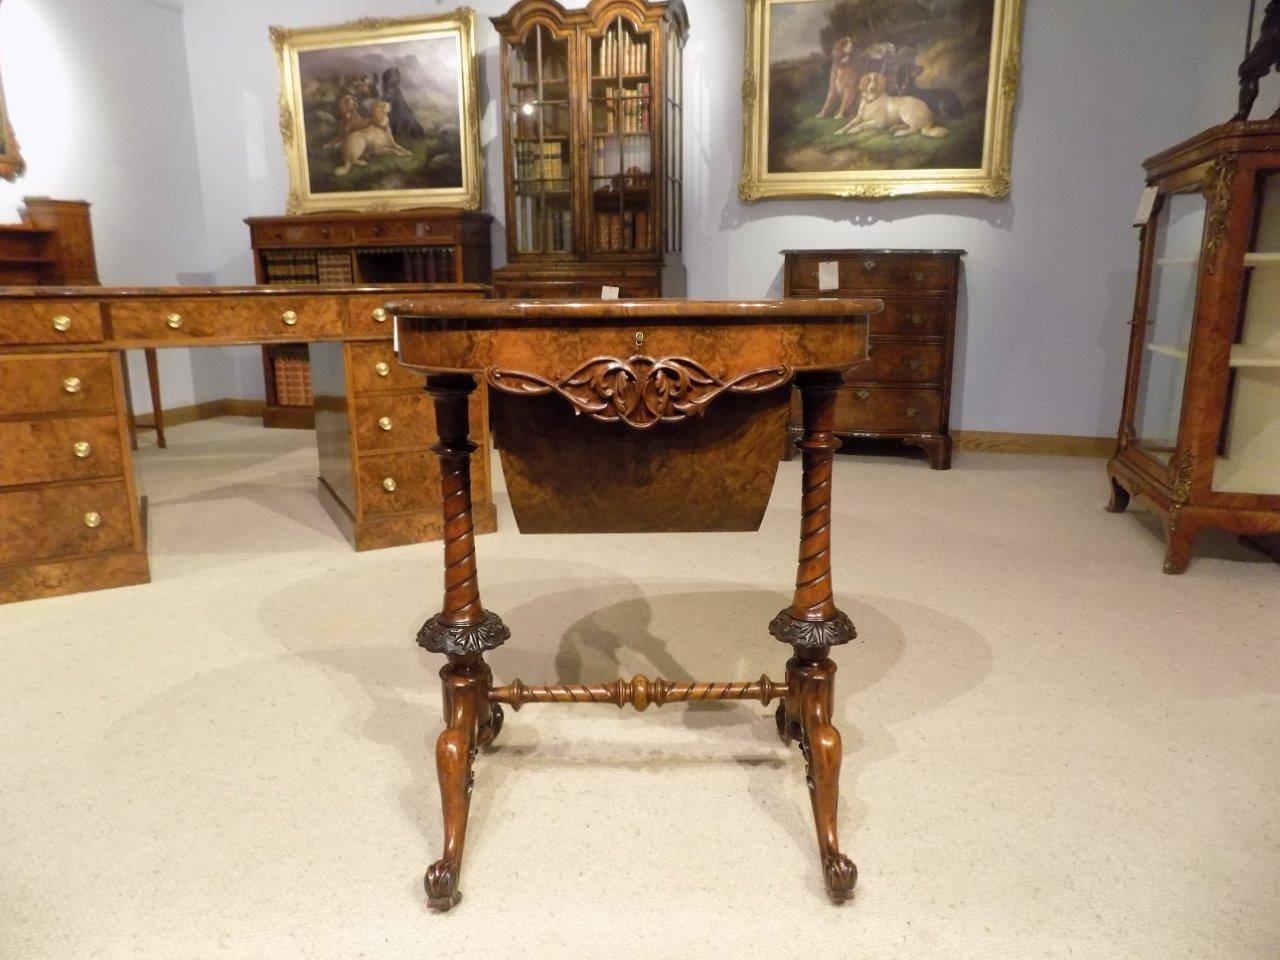 A superb quality burr walnut Victorian period oval shaped antique sewing table. The oval top is veneered in beautifully figured burr walnut and opening to reveal a pierced fretwork and boxwood interior and silk lined compartments. The hinged top